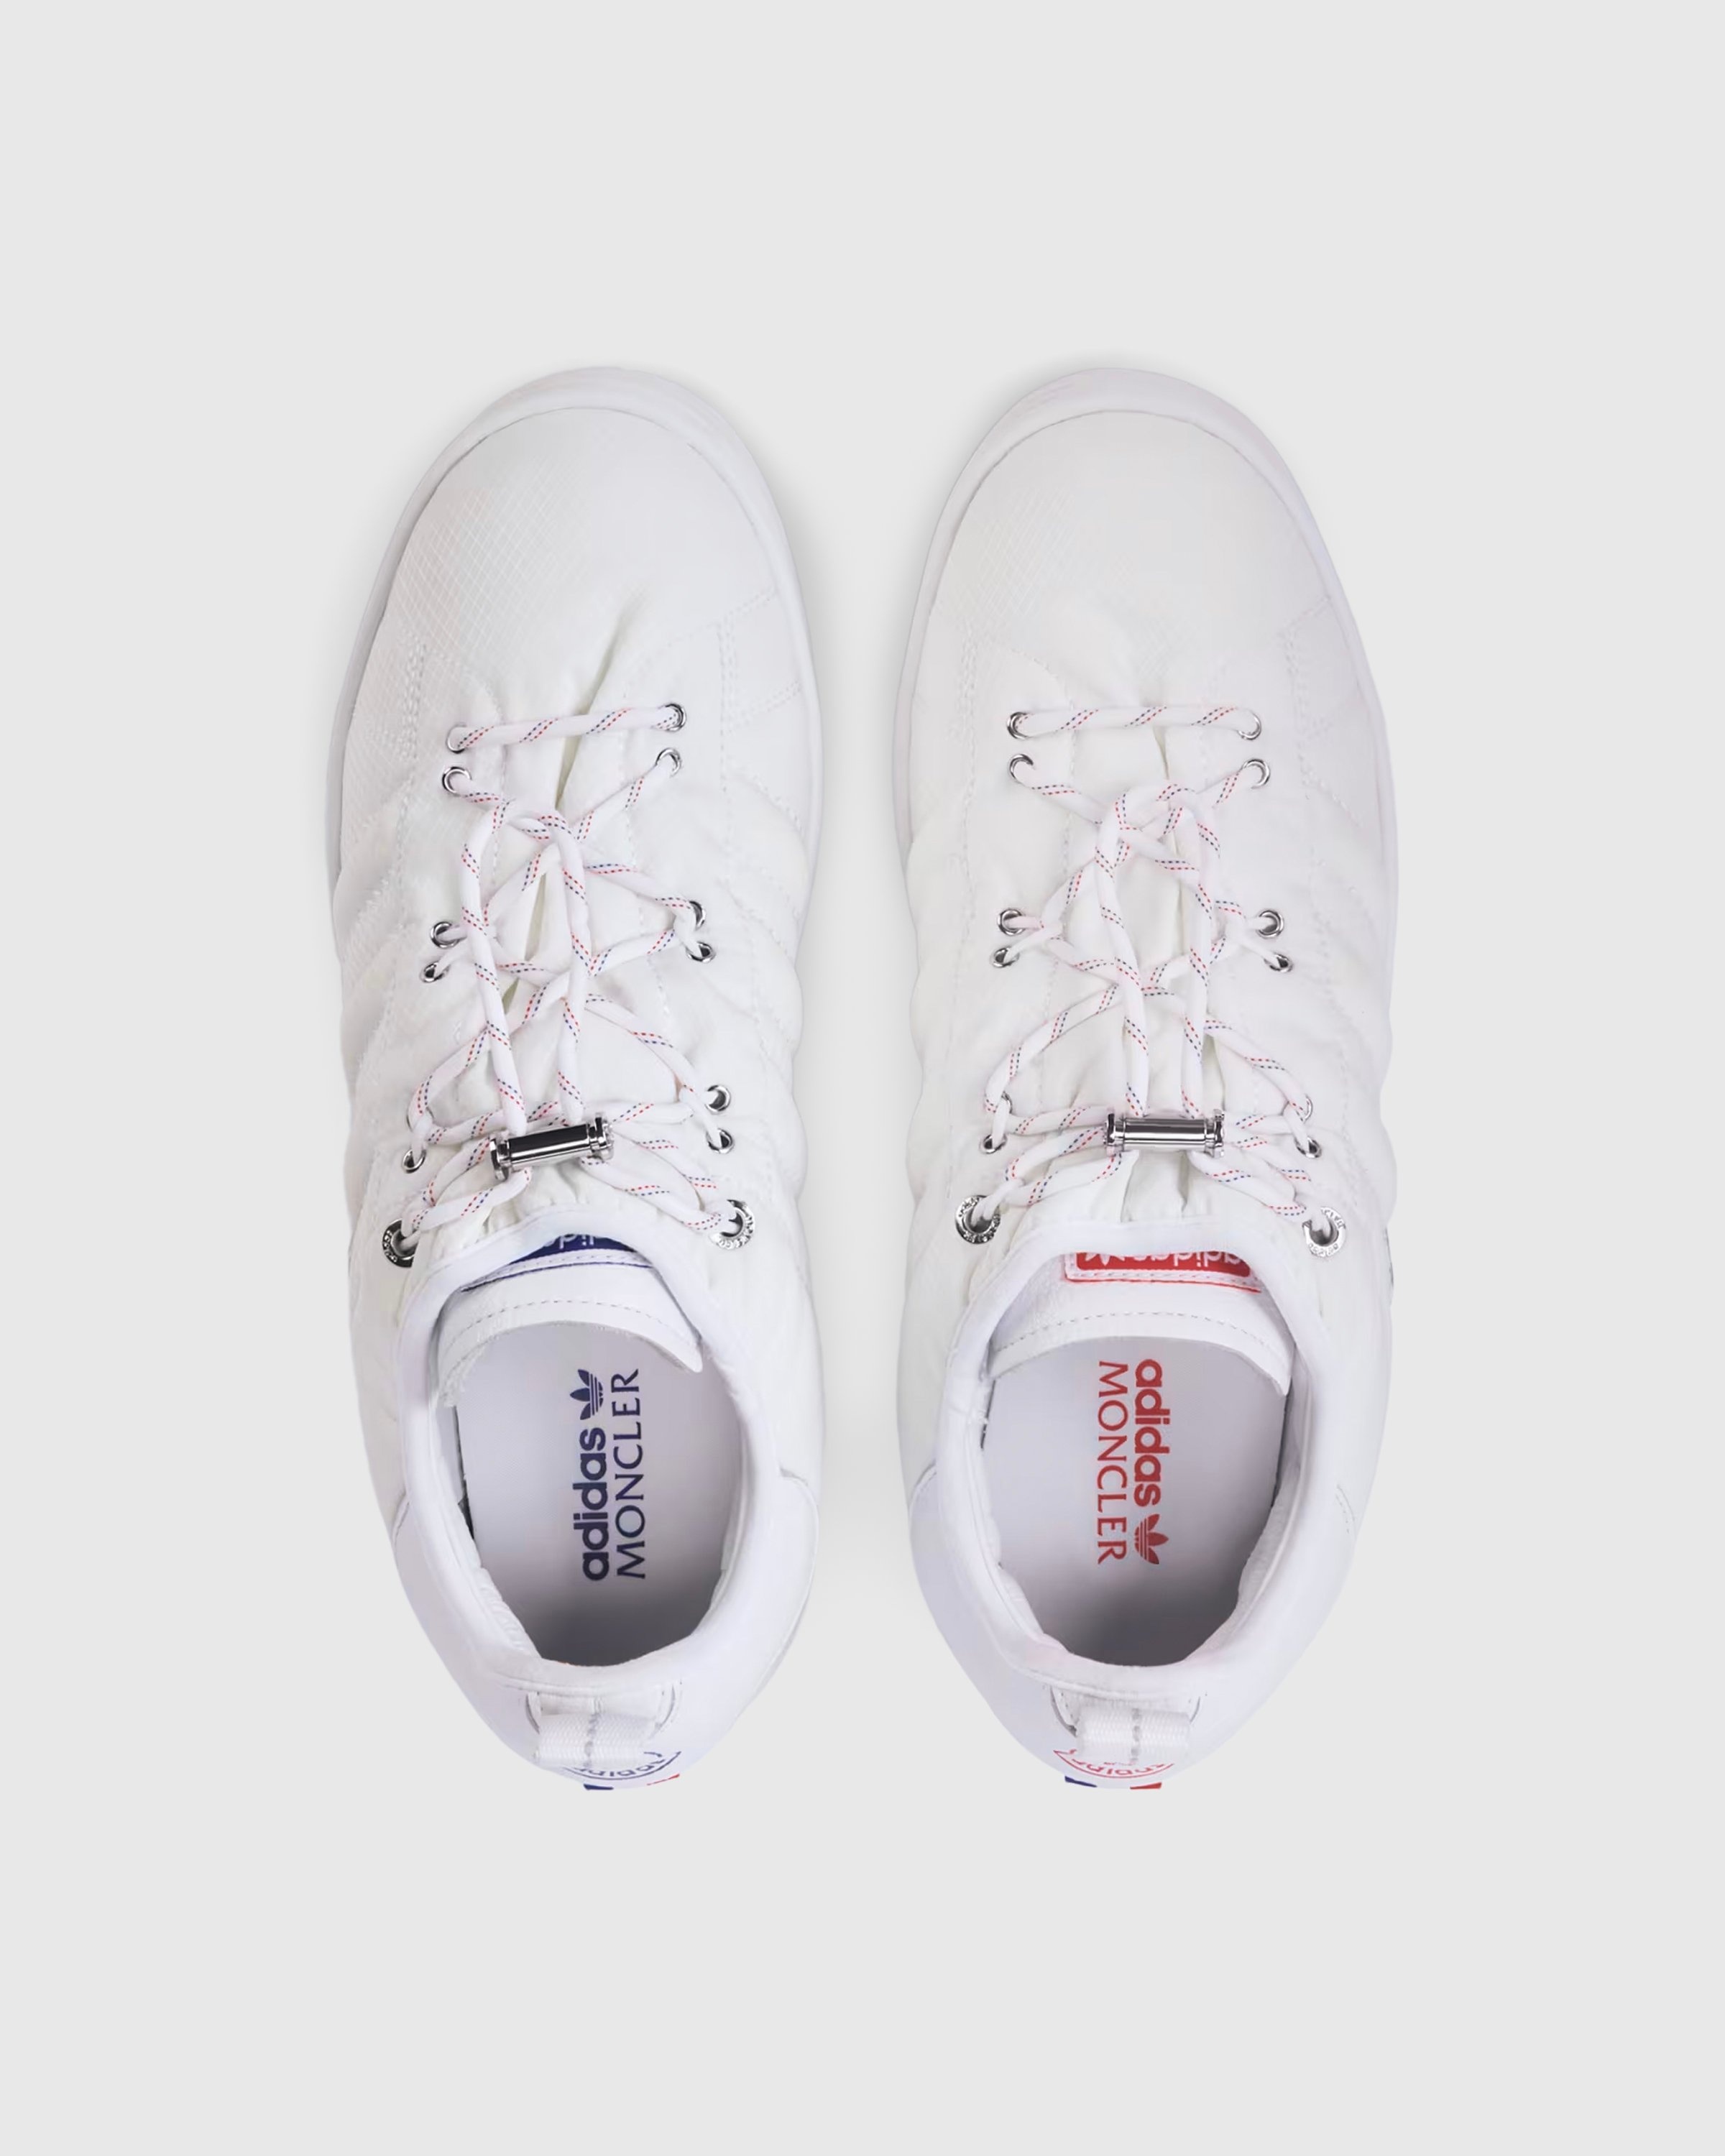 Moncler x adidas Originals – Campus Shoes Core White  - Sneakers - White - Image 3